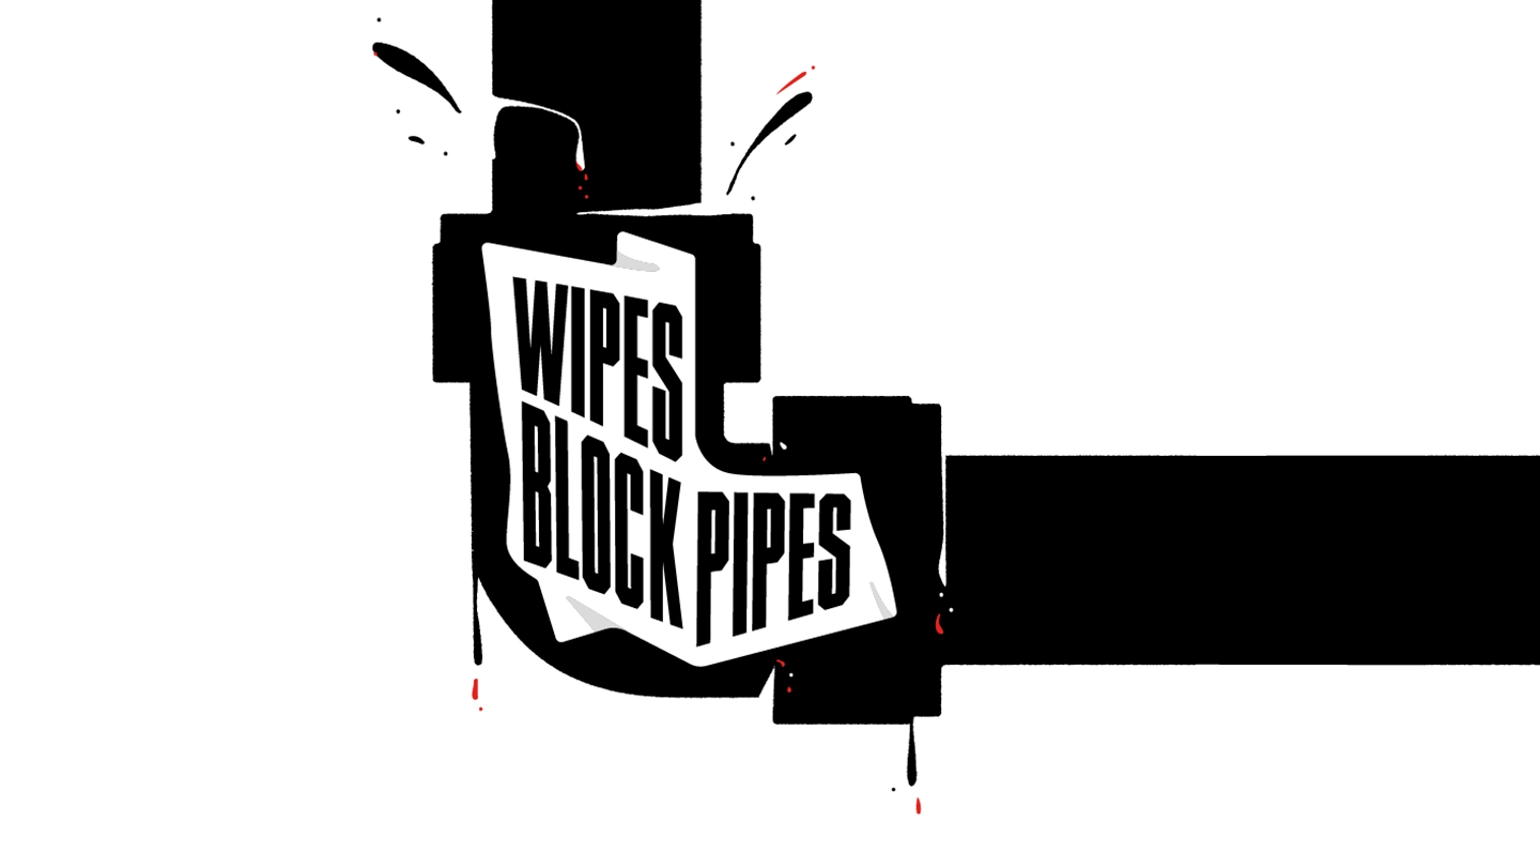 Illustration of wipes blocking pipes